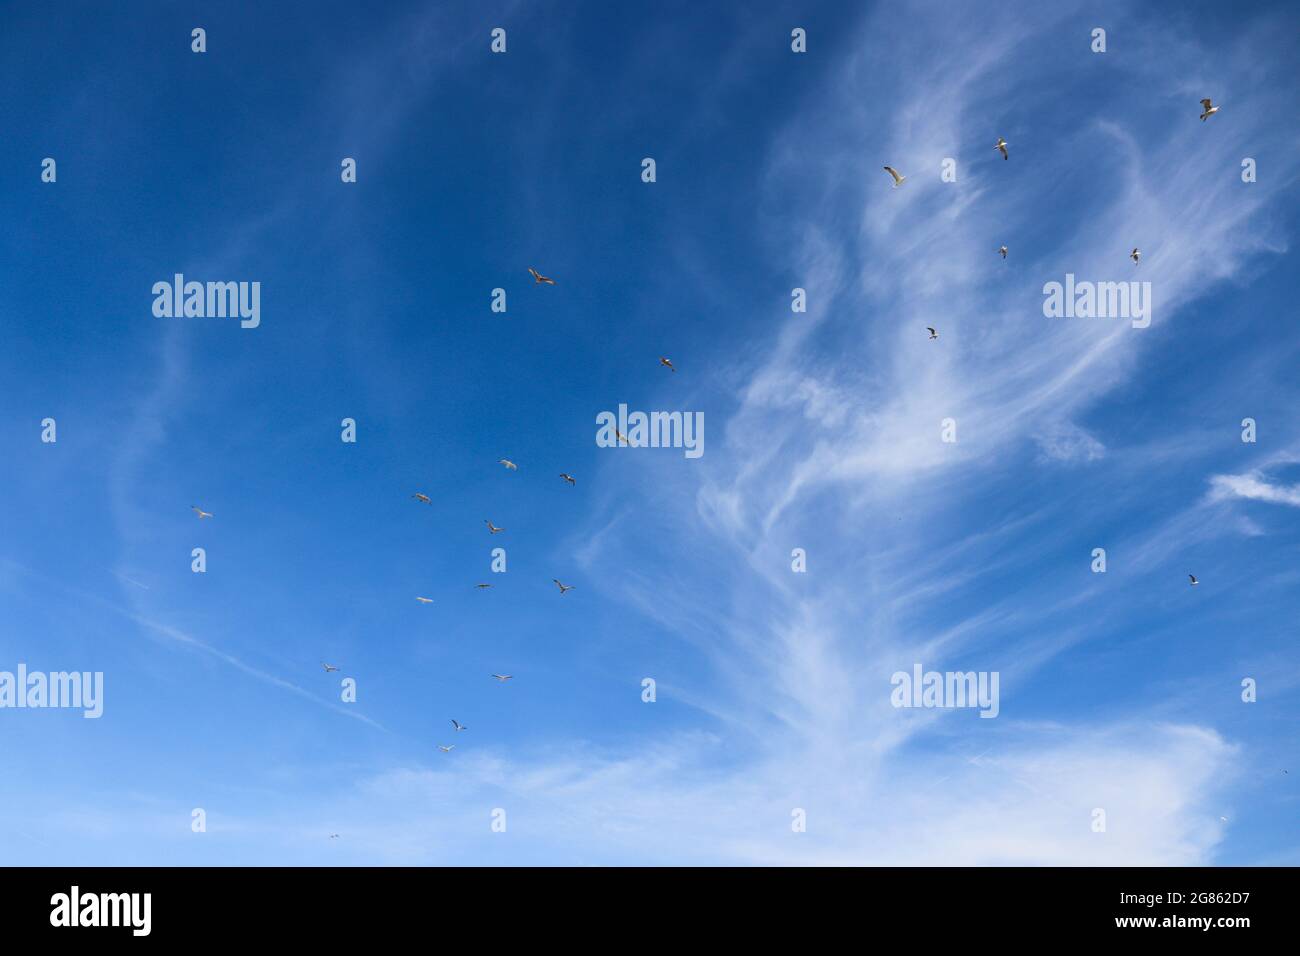 Blue sky with clouds. Blue sky background. Stock Photo